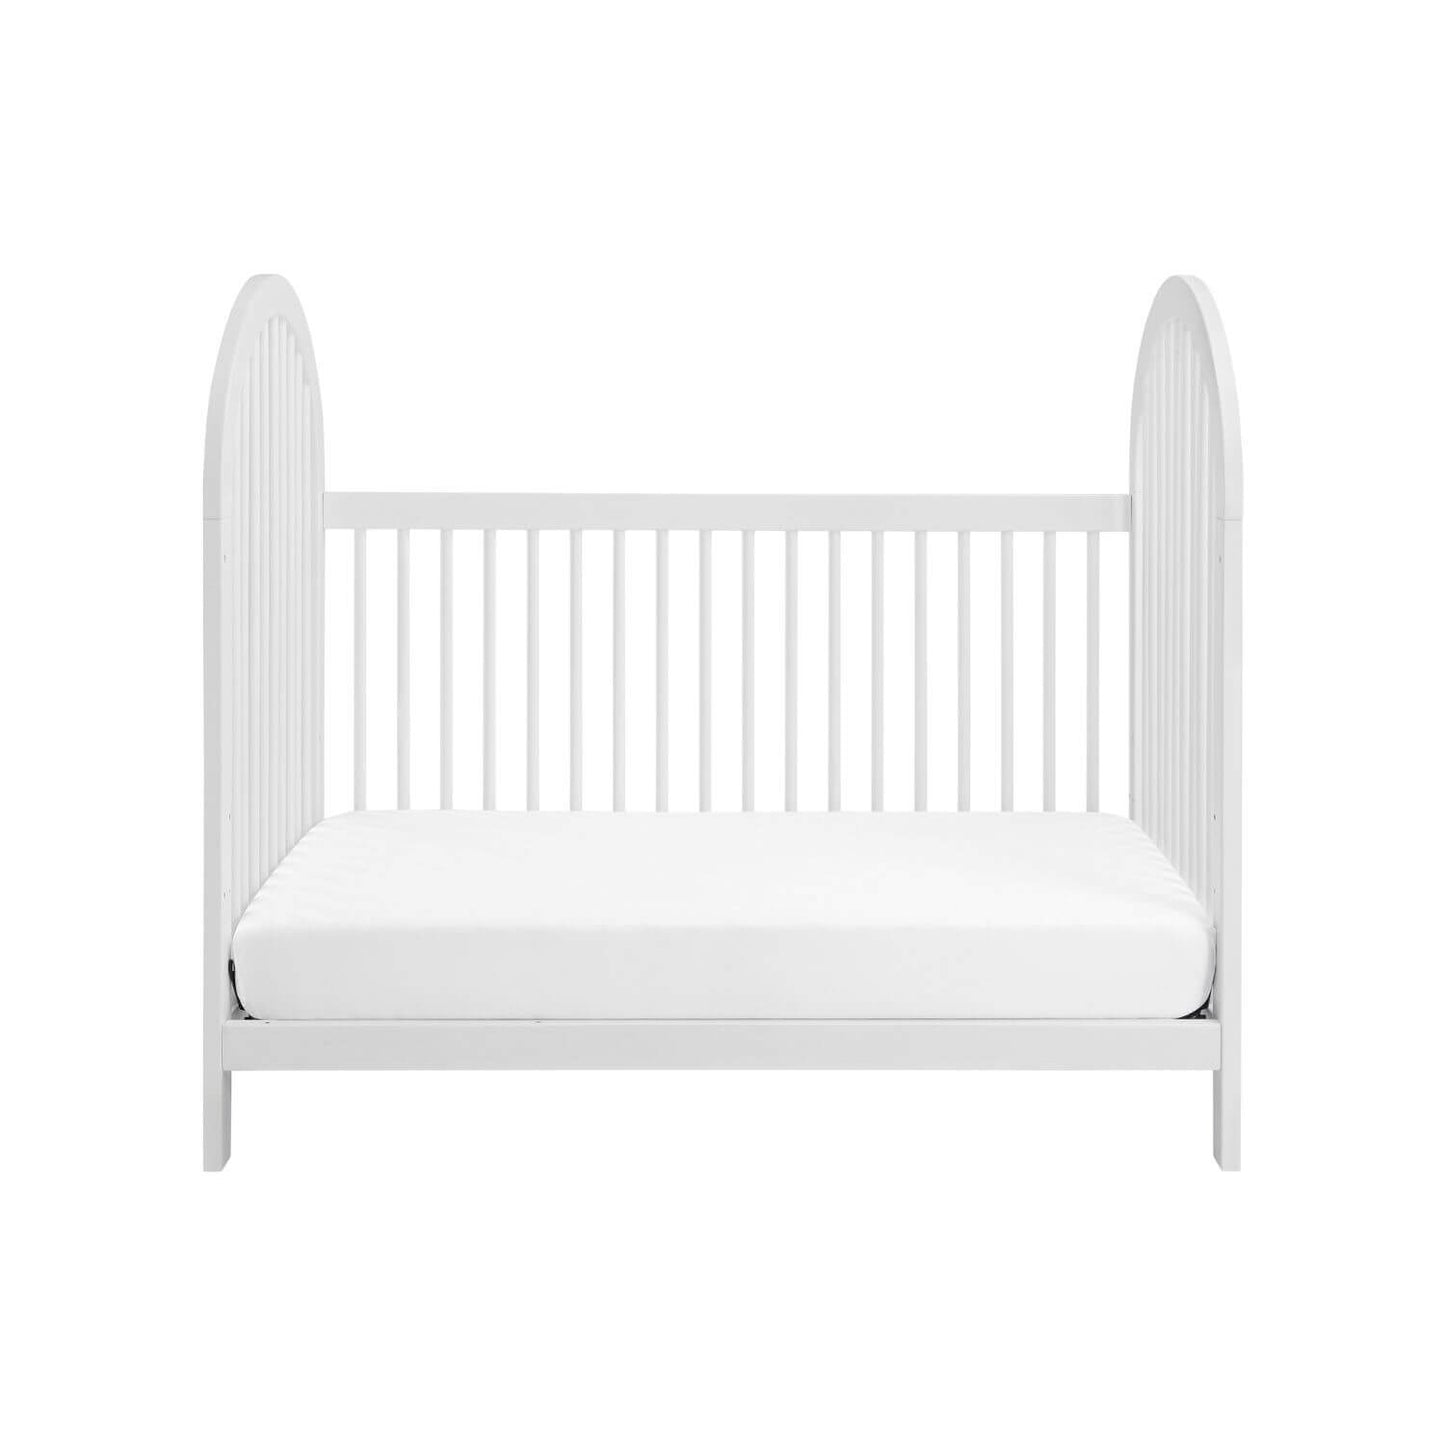 Soho Baby Everlee 3-in-1 Convertible Island Crib in Whitewash - Converted to a Daybed